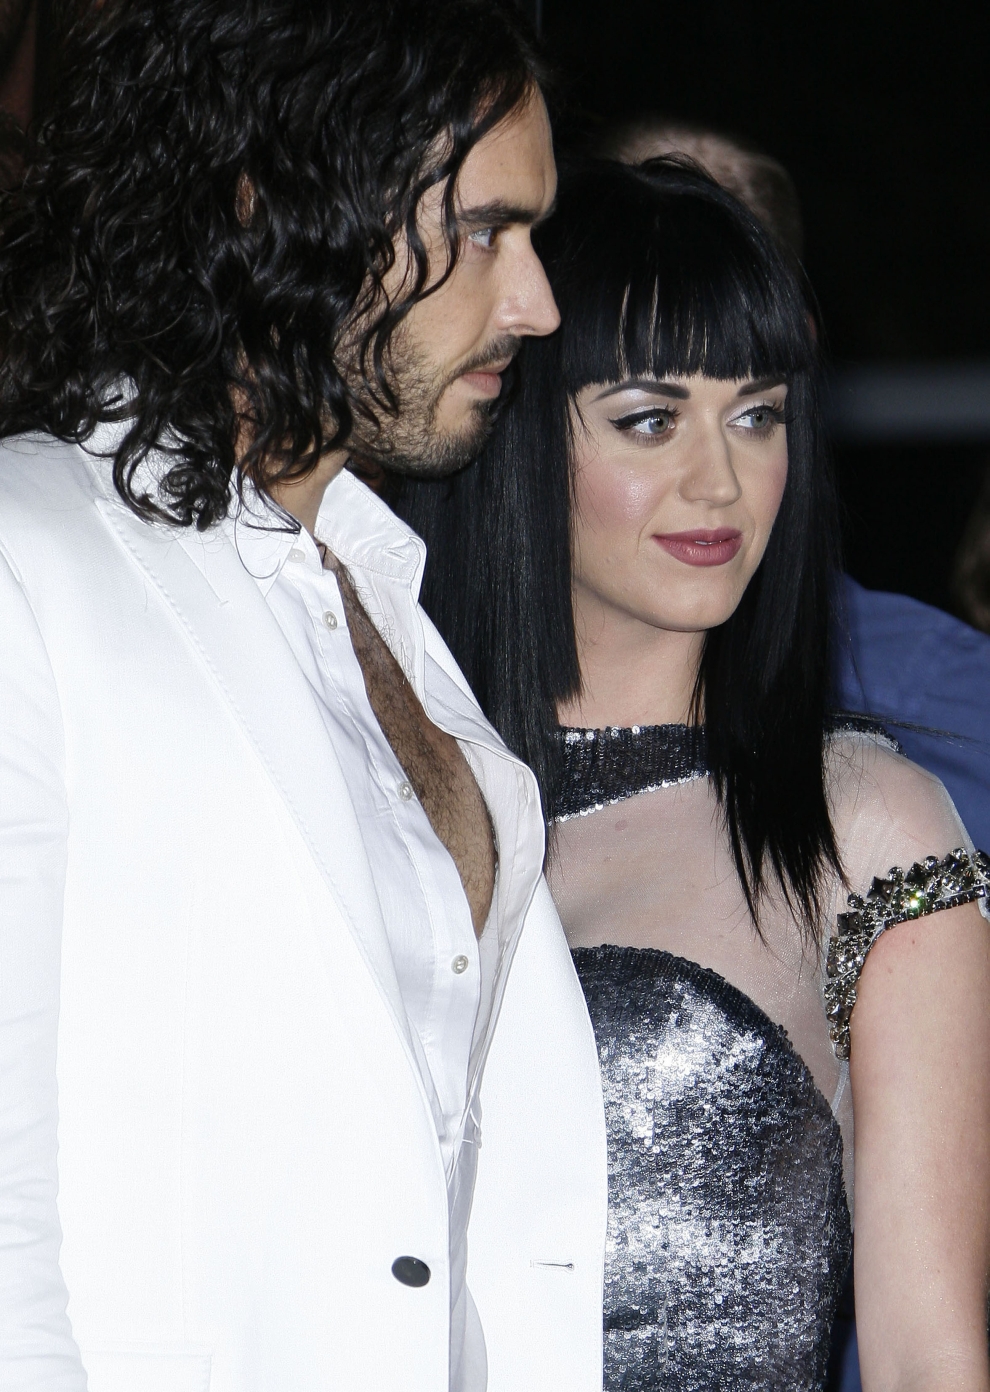 Katy Perry i Russell Brand - premiera Get Him To The Greek